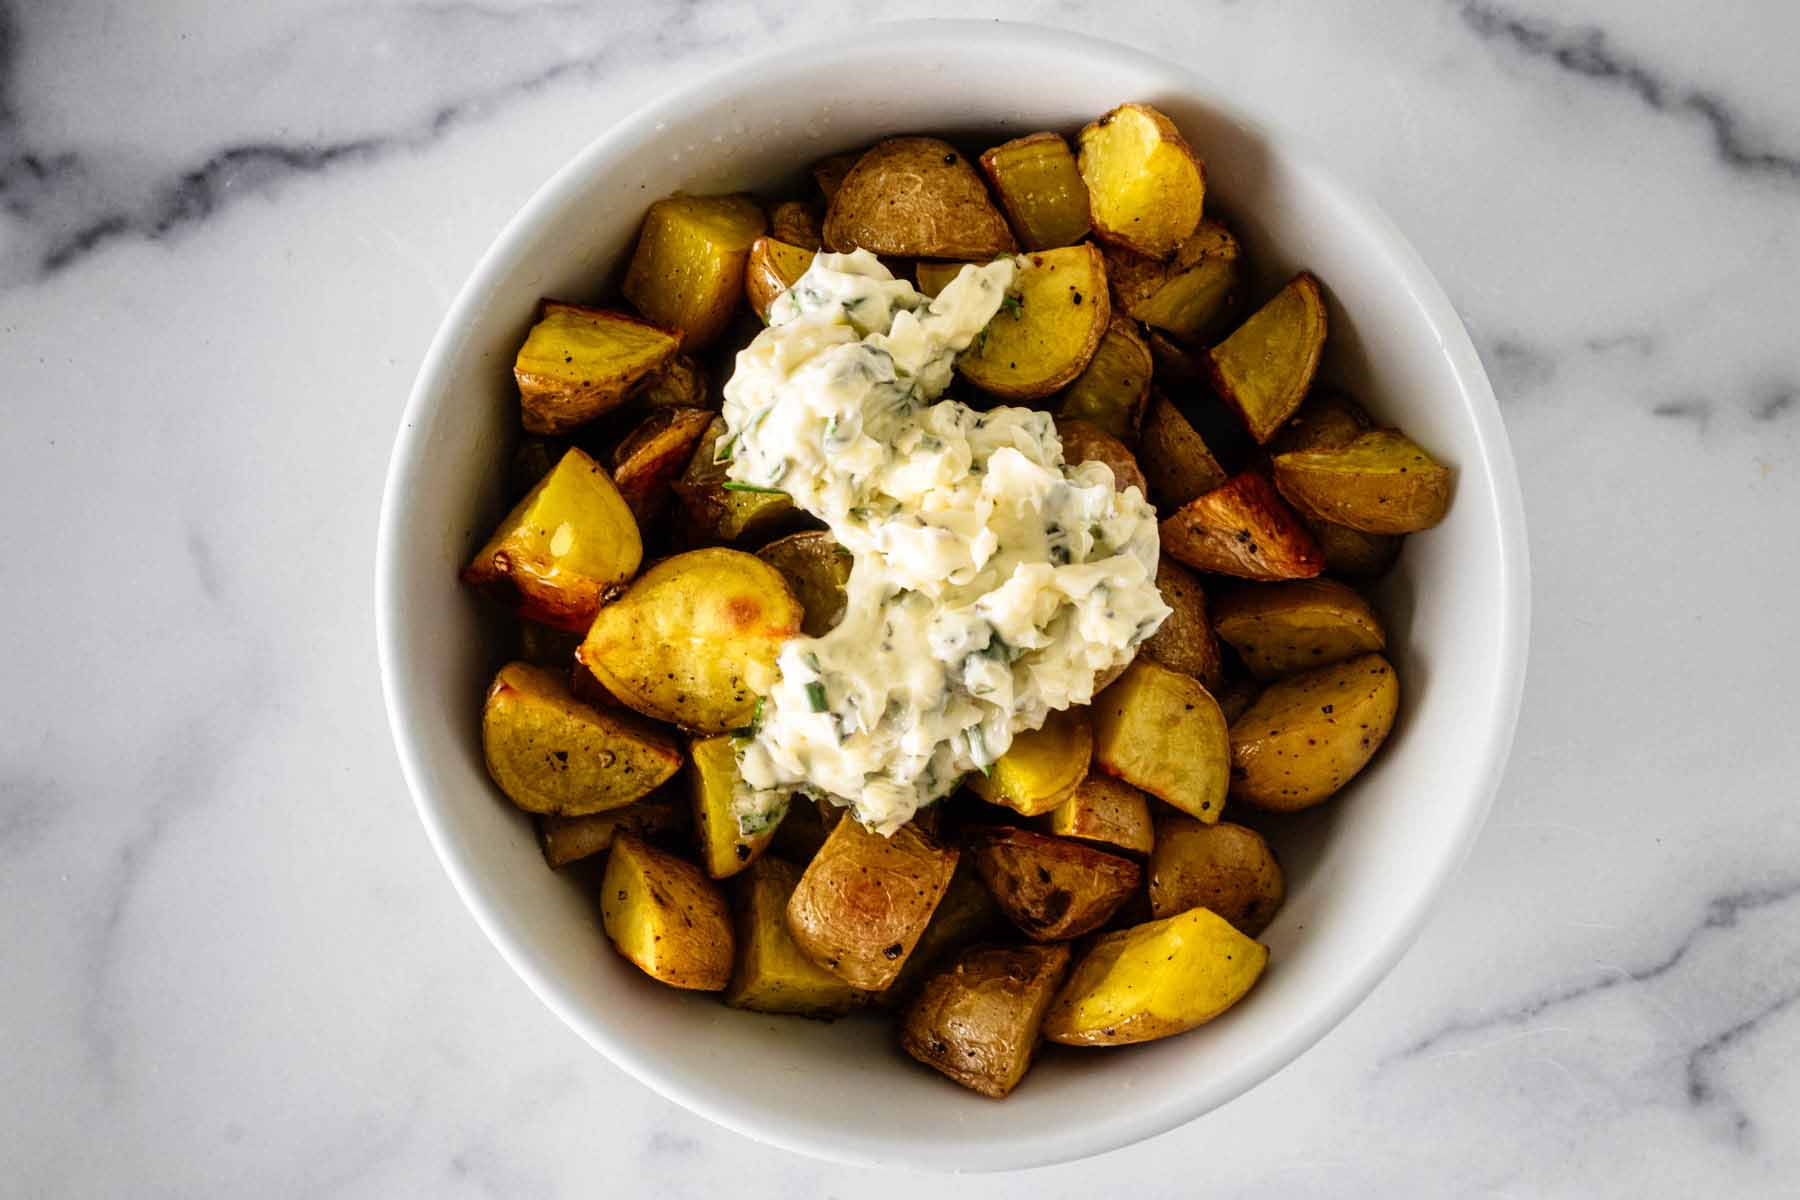 Garlic and rosemary butter mixes on top of roasted potatoes.